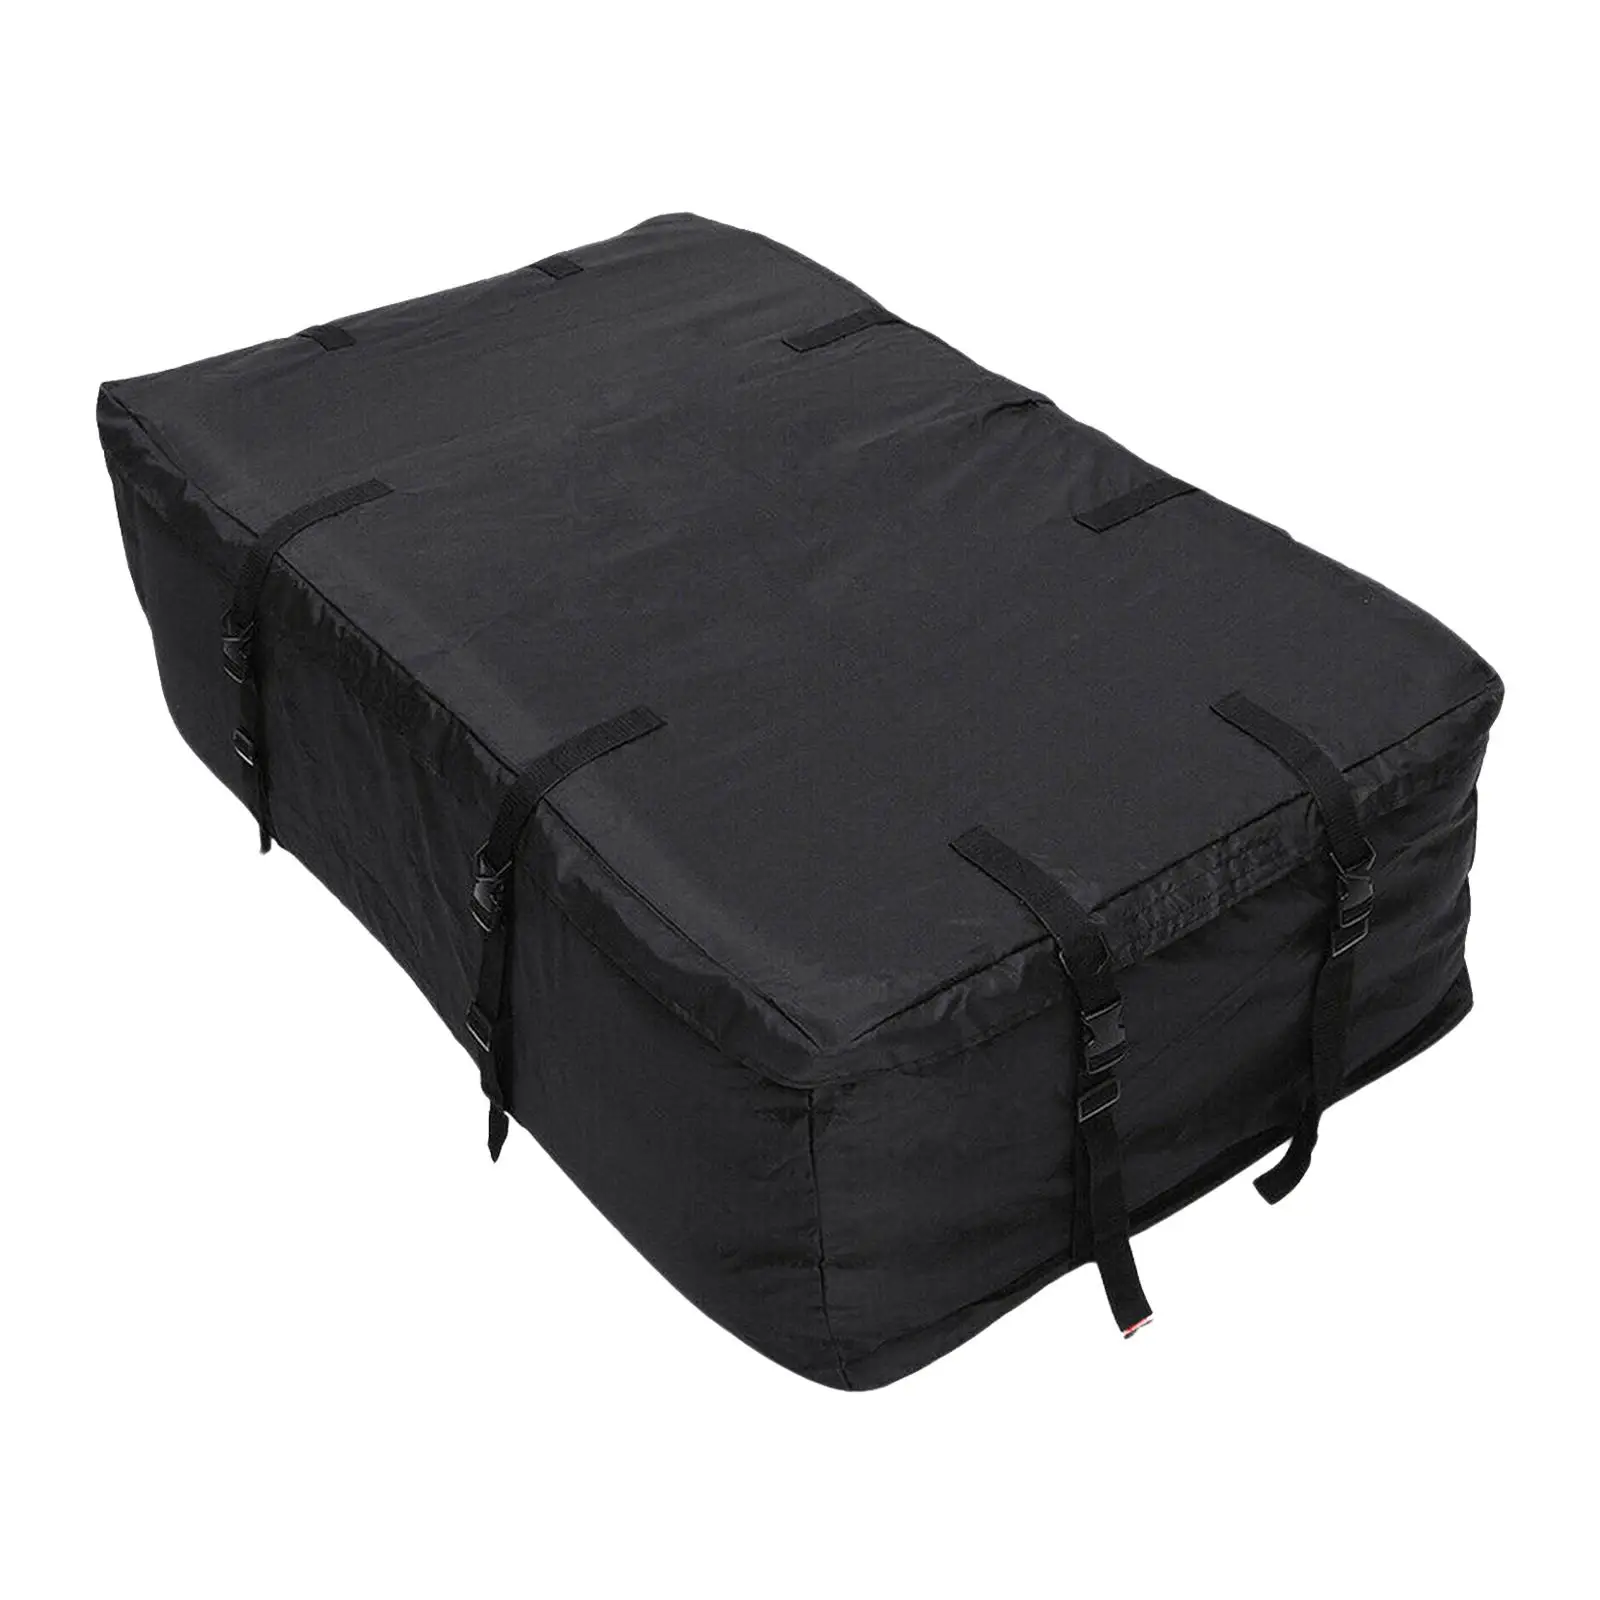 Roof Bar Roof Bag Waterproof Vehicle Rooftop Rooftop Carrier with Large Capacity Roof Luggage Storage Bag Rooftop Cargo Lug Bar